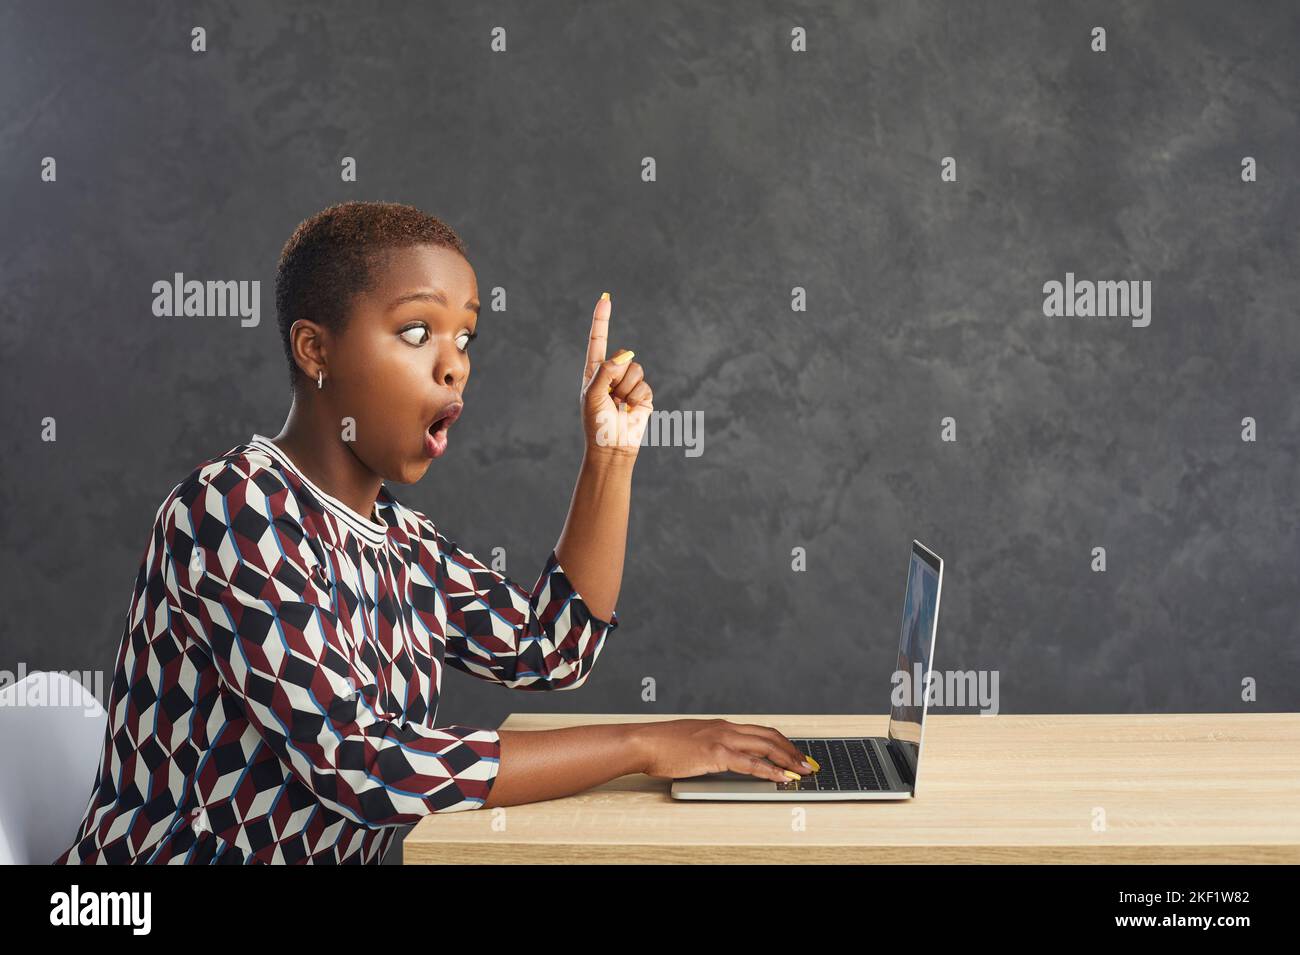 Woman sitting at laptop raises index finger up as sign that he came up with bright idea or thought. Stock Photo